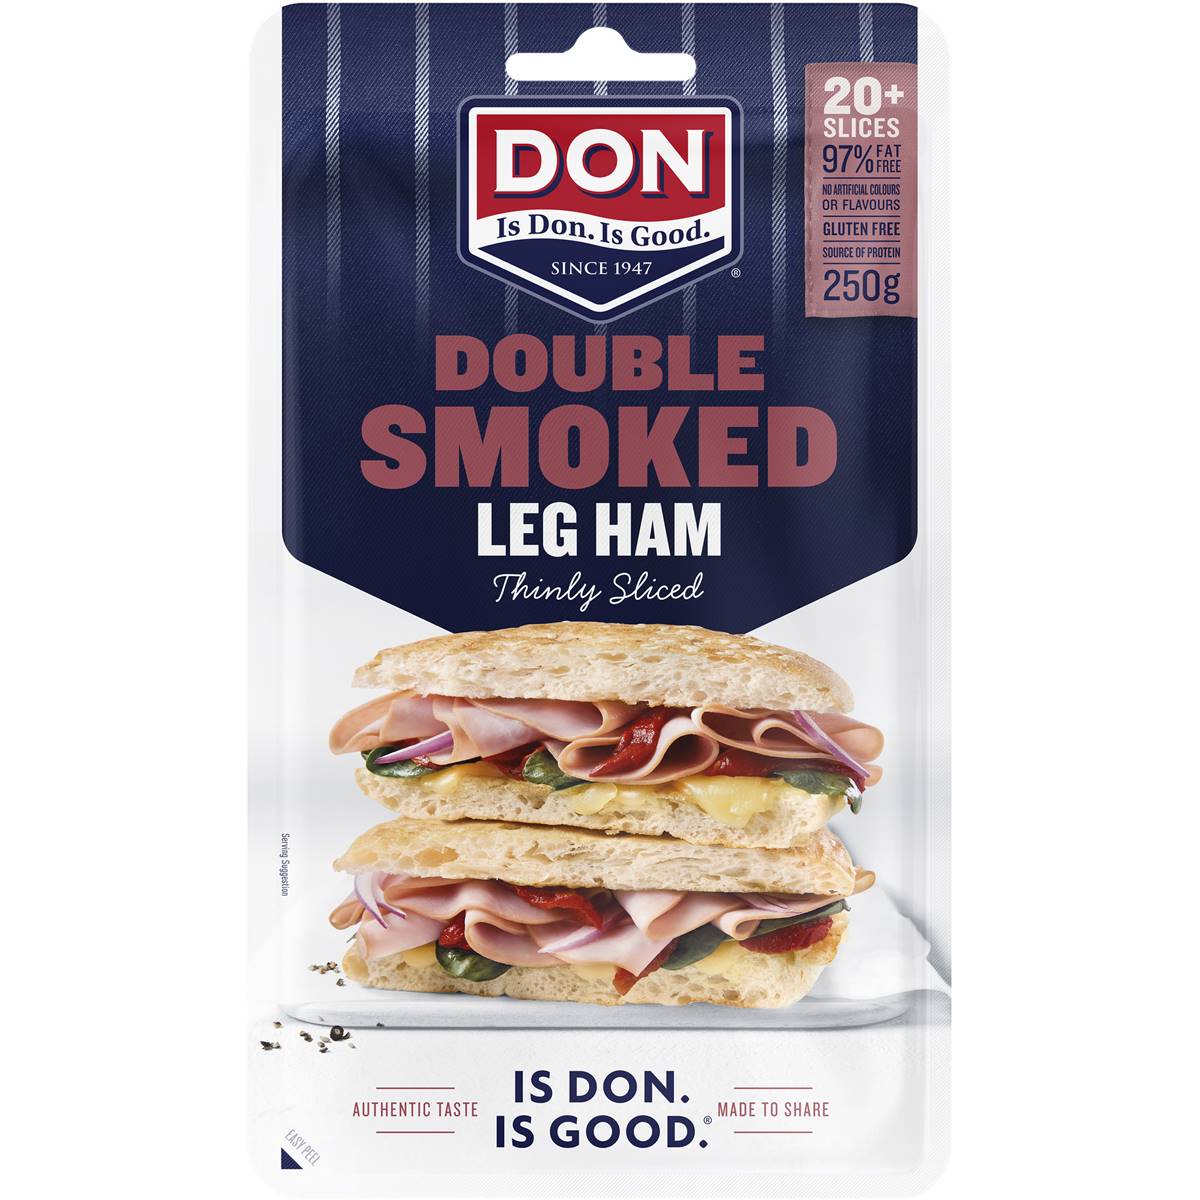 Calories in Don Ham Leg Double Smoked Shaved